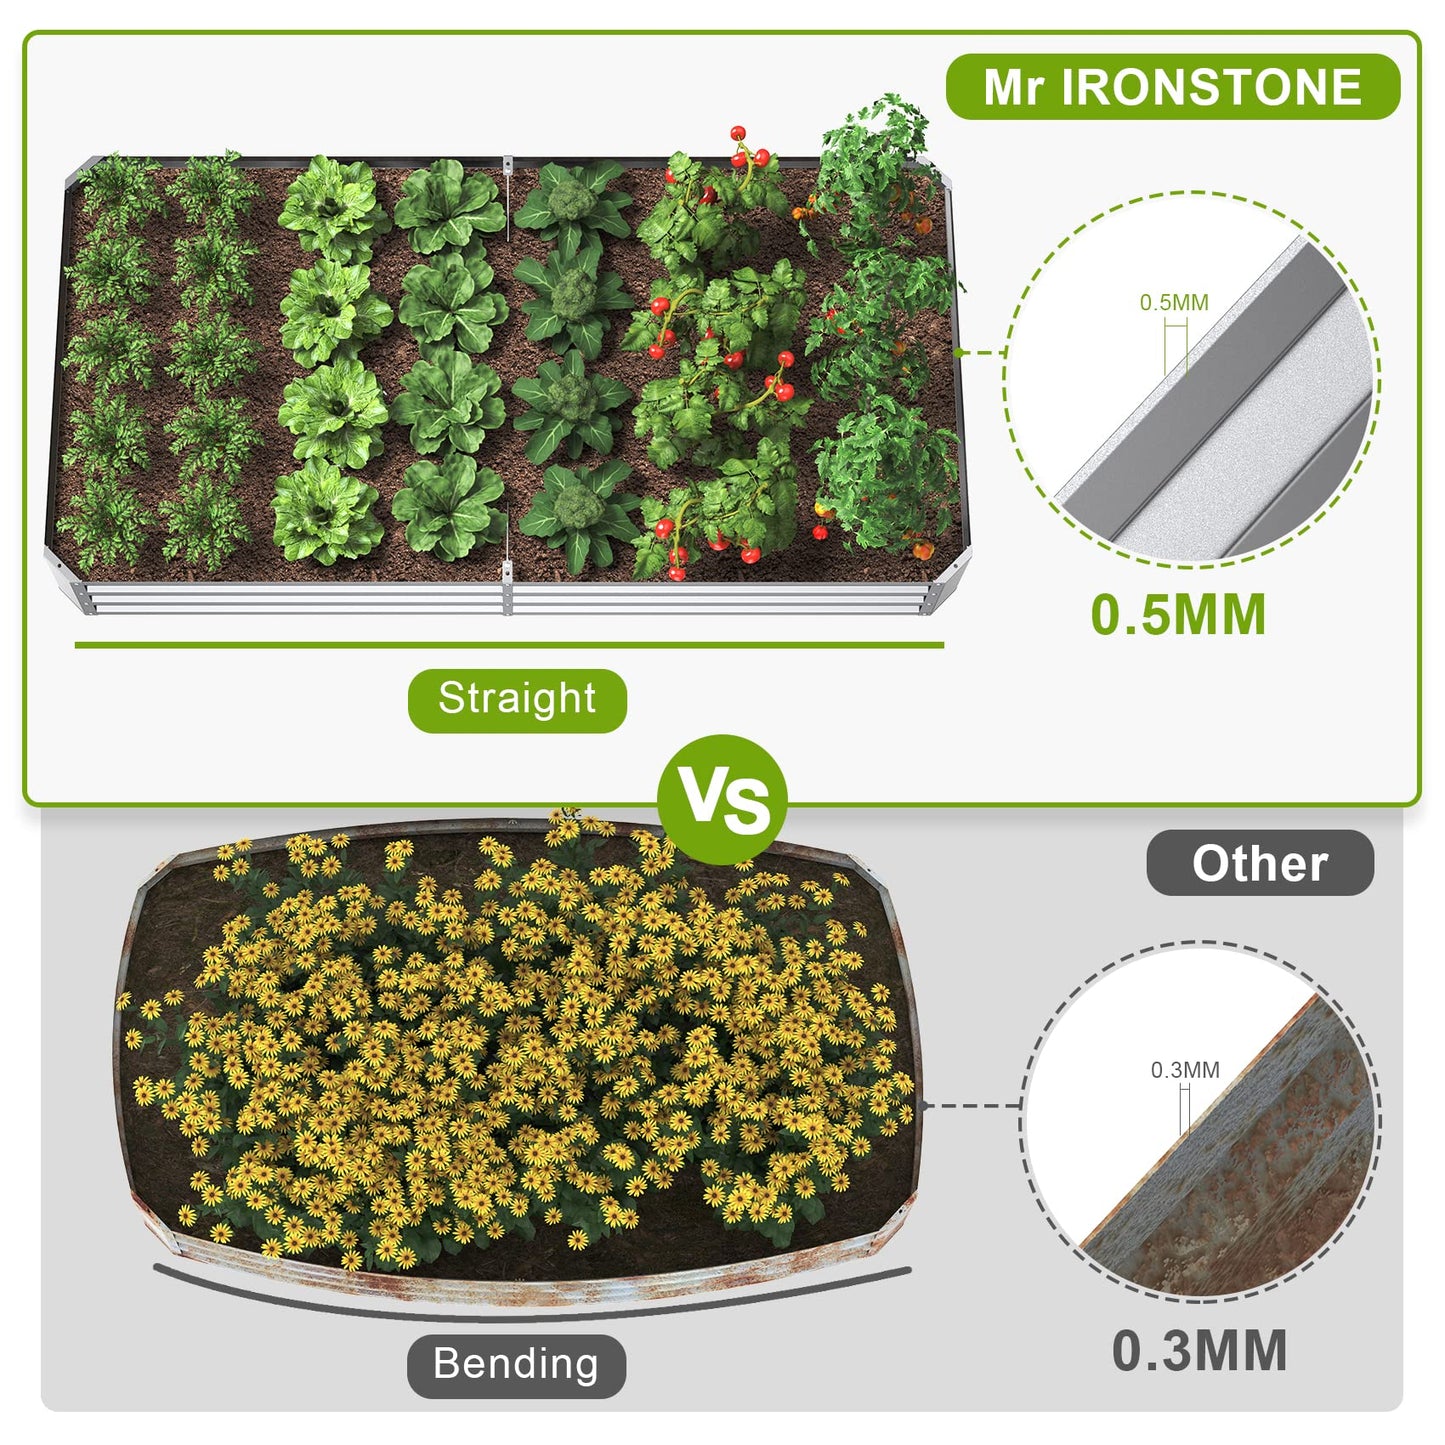 Mr IRONSTONE 4×8×1ft Galvanized Raised Garden Bed Outdoor for Vegetables Flowers Herb, Large Heavy Metal Planter Box Steel Kit with Metal Stake to Fix